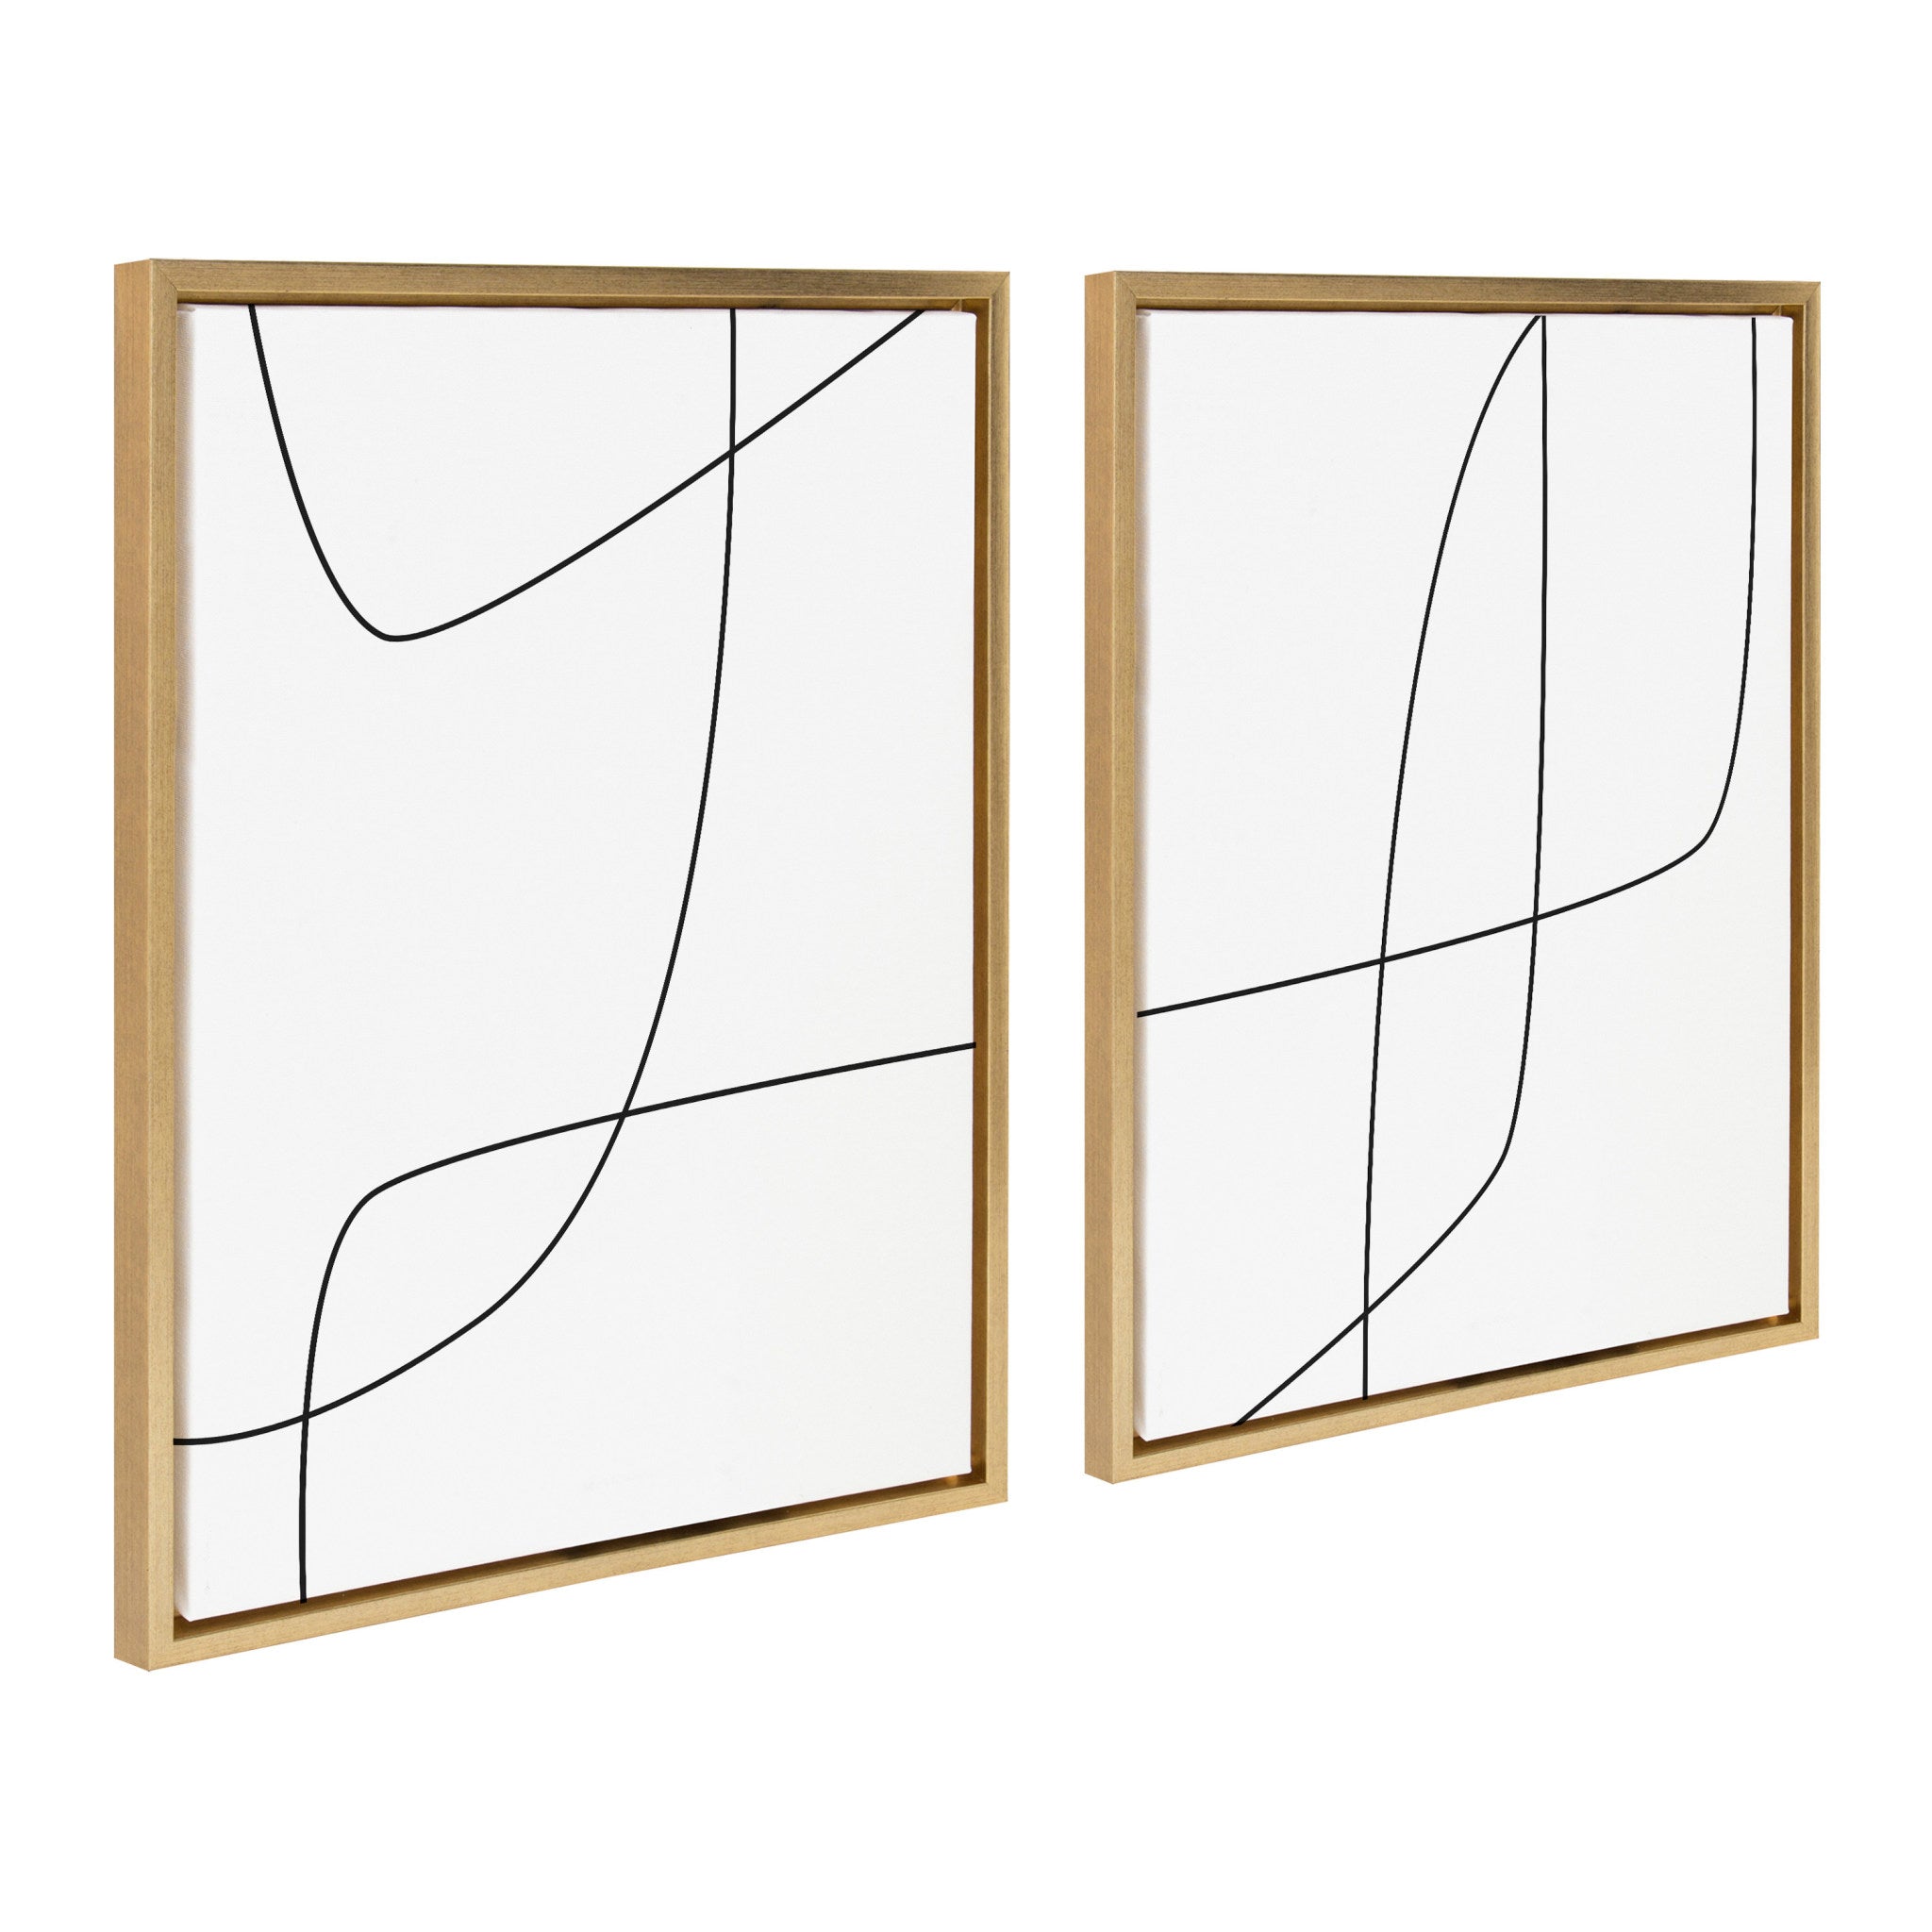 Sylvie Modern Line Abstract 3 and 4 Black and White Framed Canvas by The Creative Bunch Studio